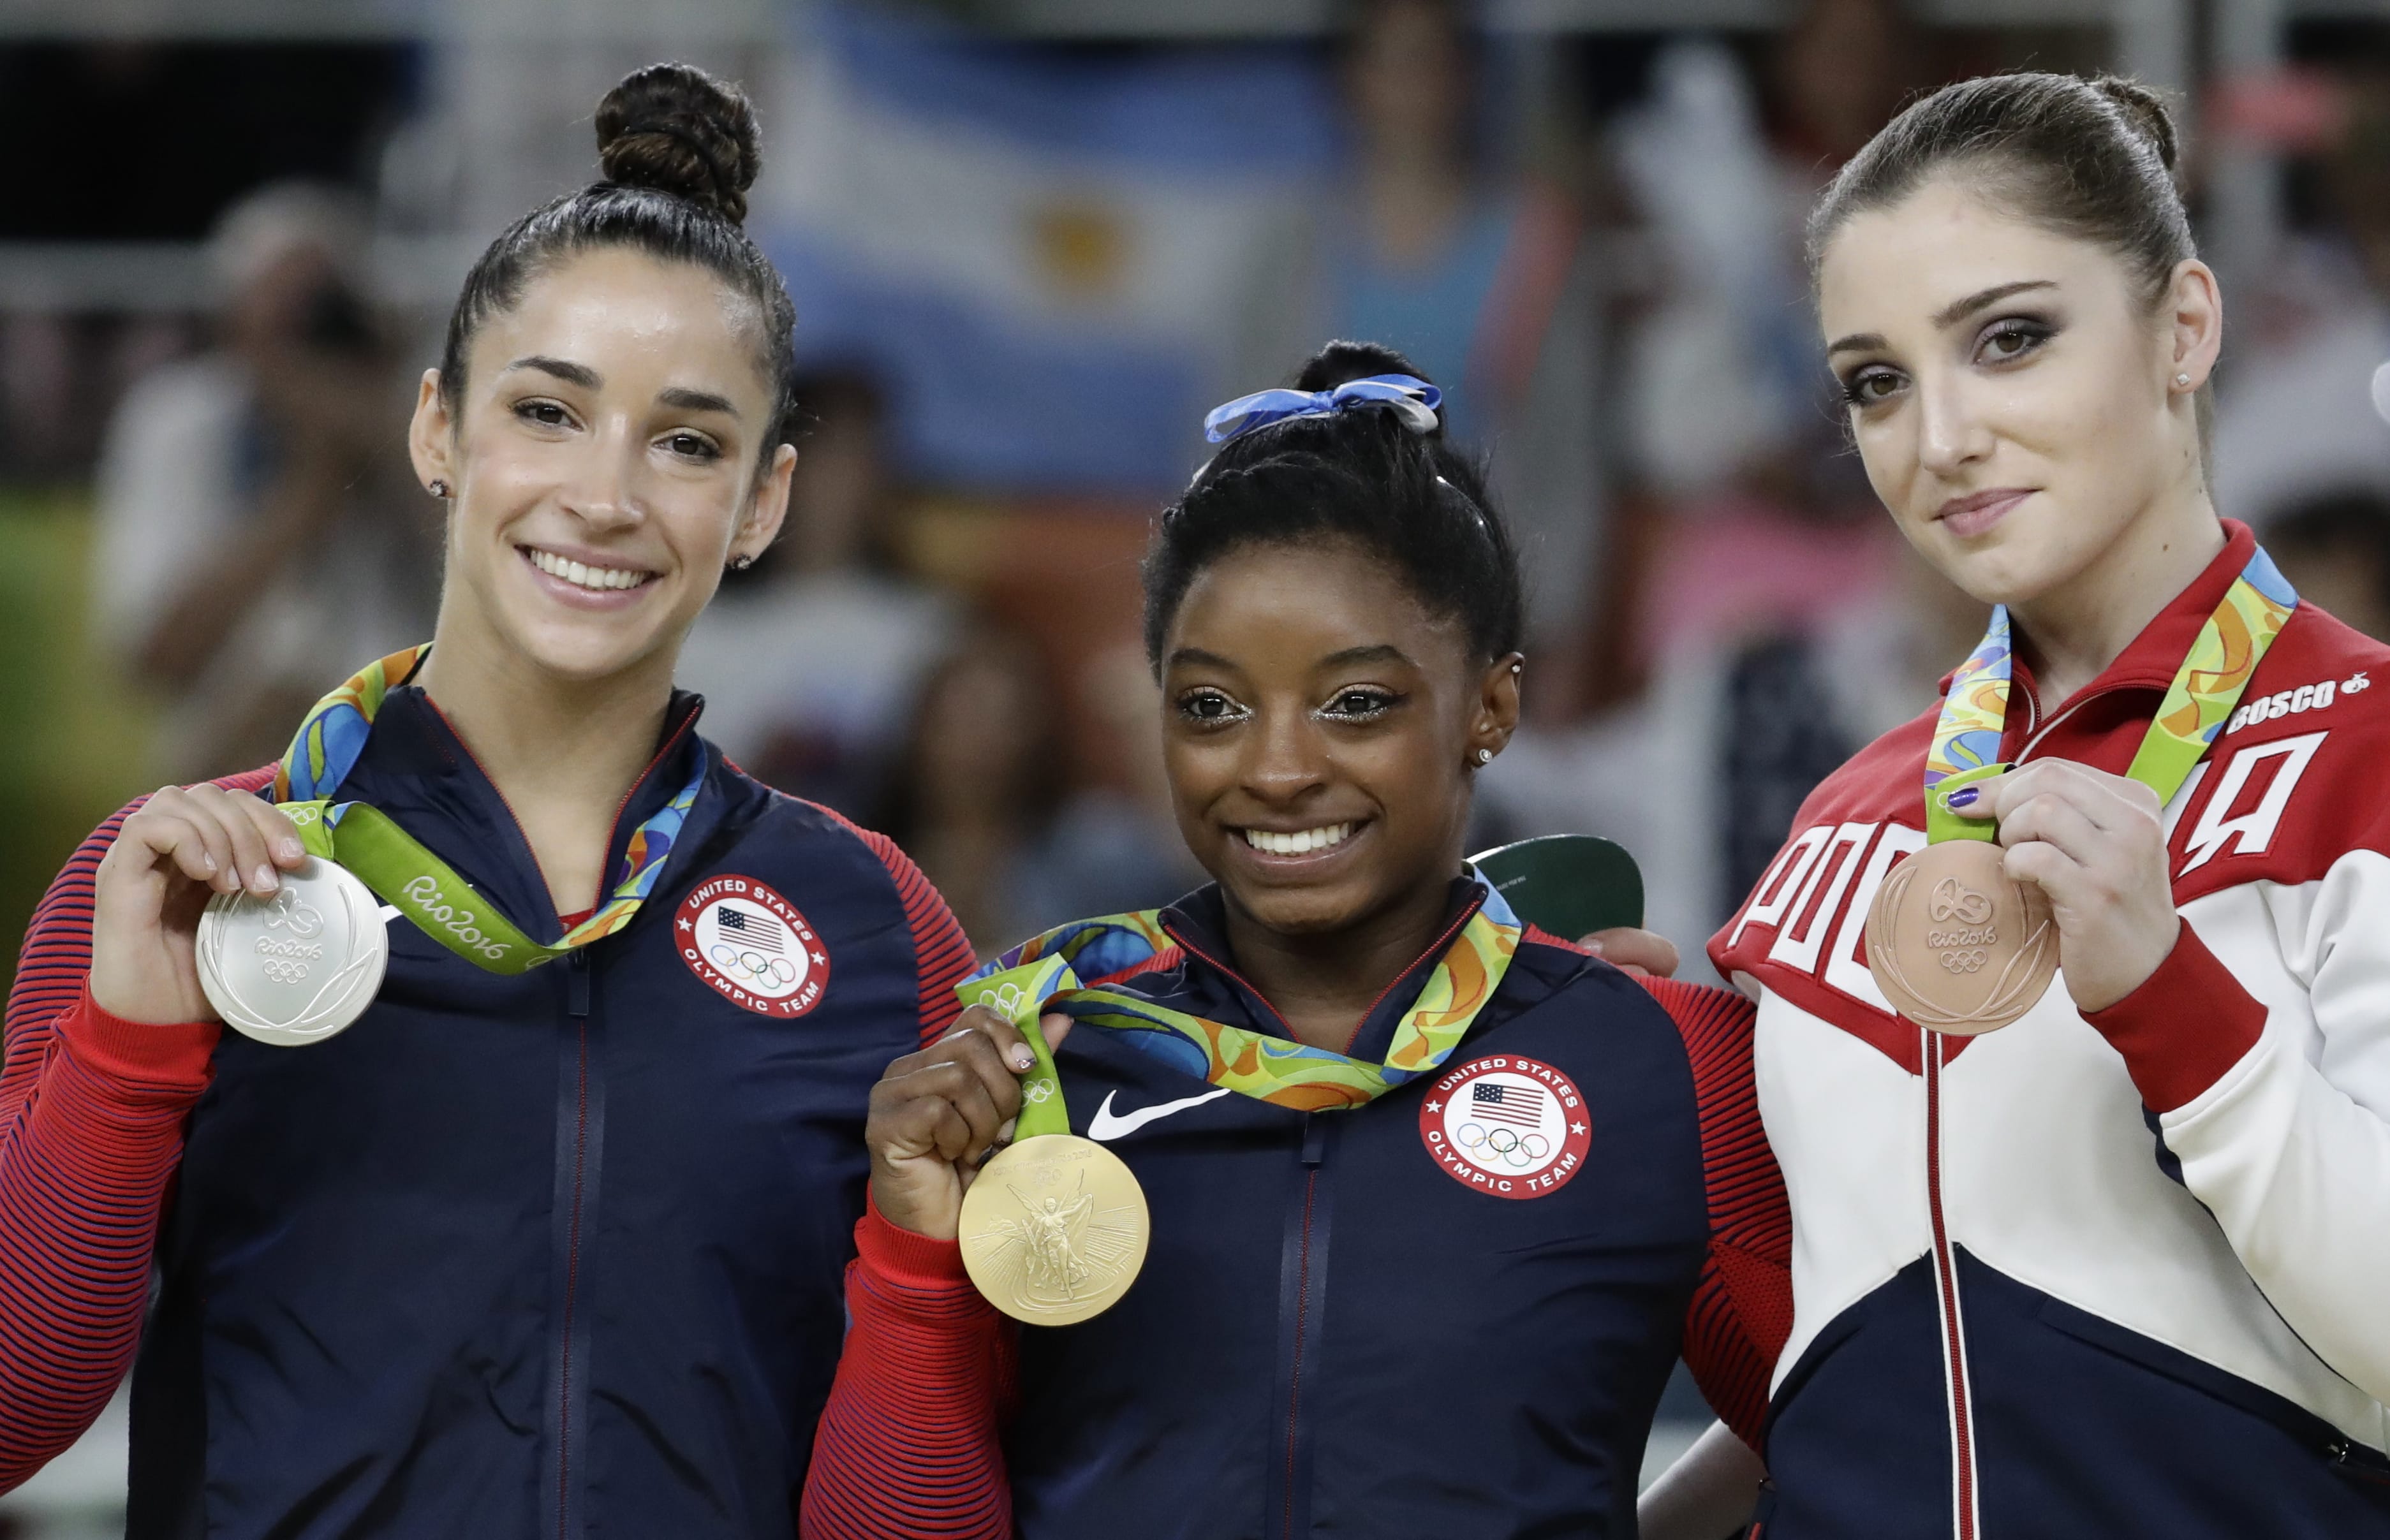 Bronze medallist Russia's Aliya Mustafina, right, gold medallist United States' Simone Biles, center, and silver medallist United States' Aly Raisman display their medals for the artistic gymnastics women's individual all-around final at the 2016 Summer Olympics in Rio de Janeiro, Brazil, Thursday, Aug. 11, 2016.